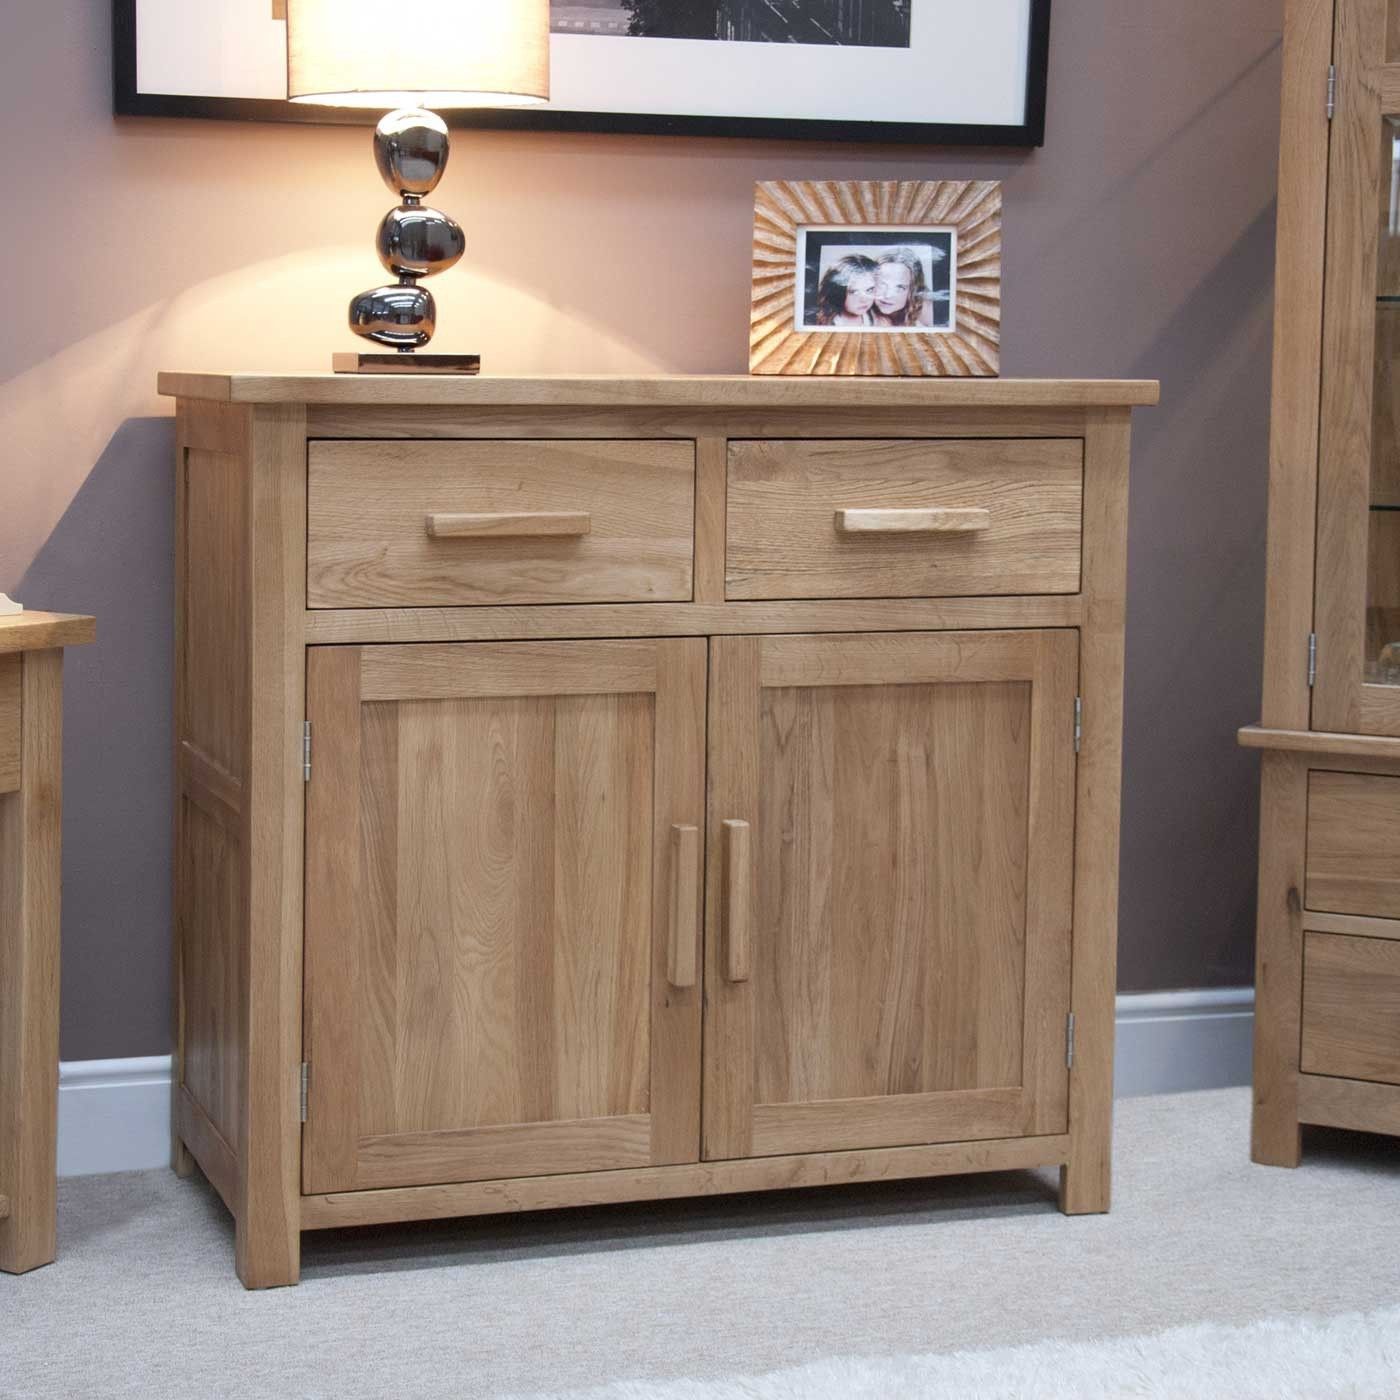 Pinrahayu12 On Interior Analogi | Small Sideboard, Oak Inside Wales Storage Sideboards (View 9 of 15)